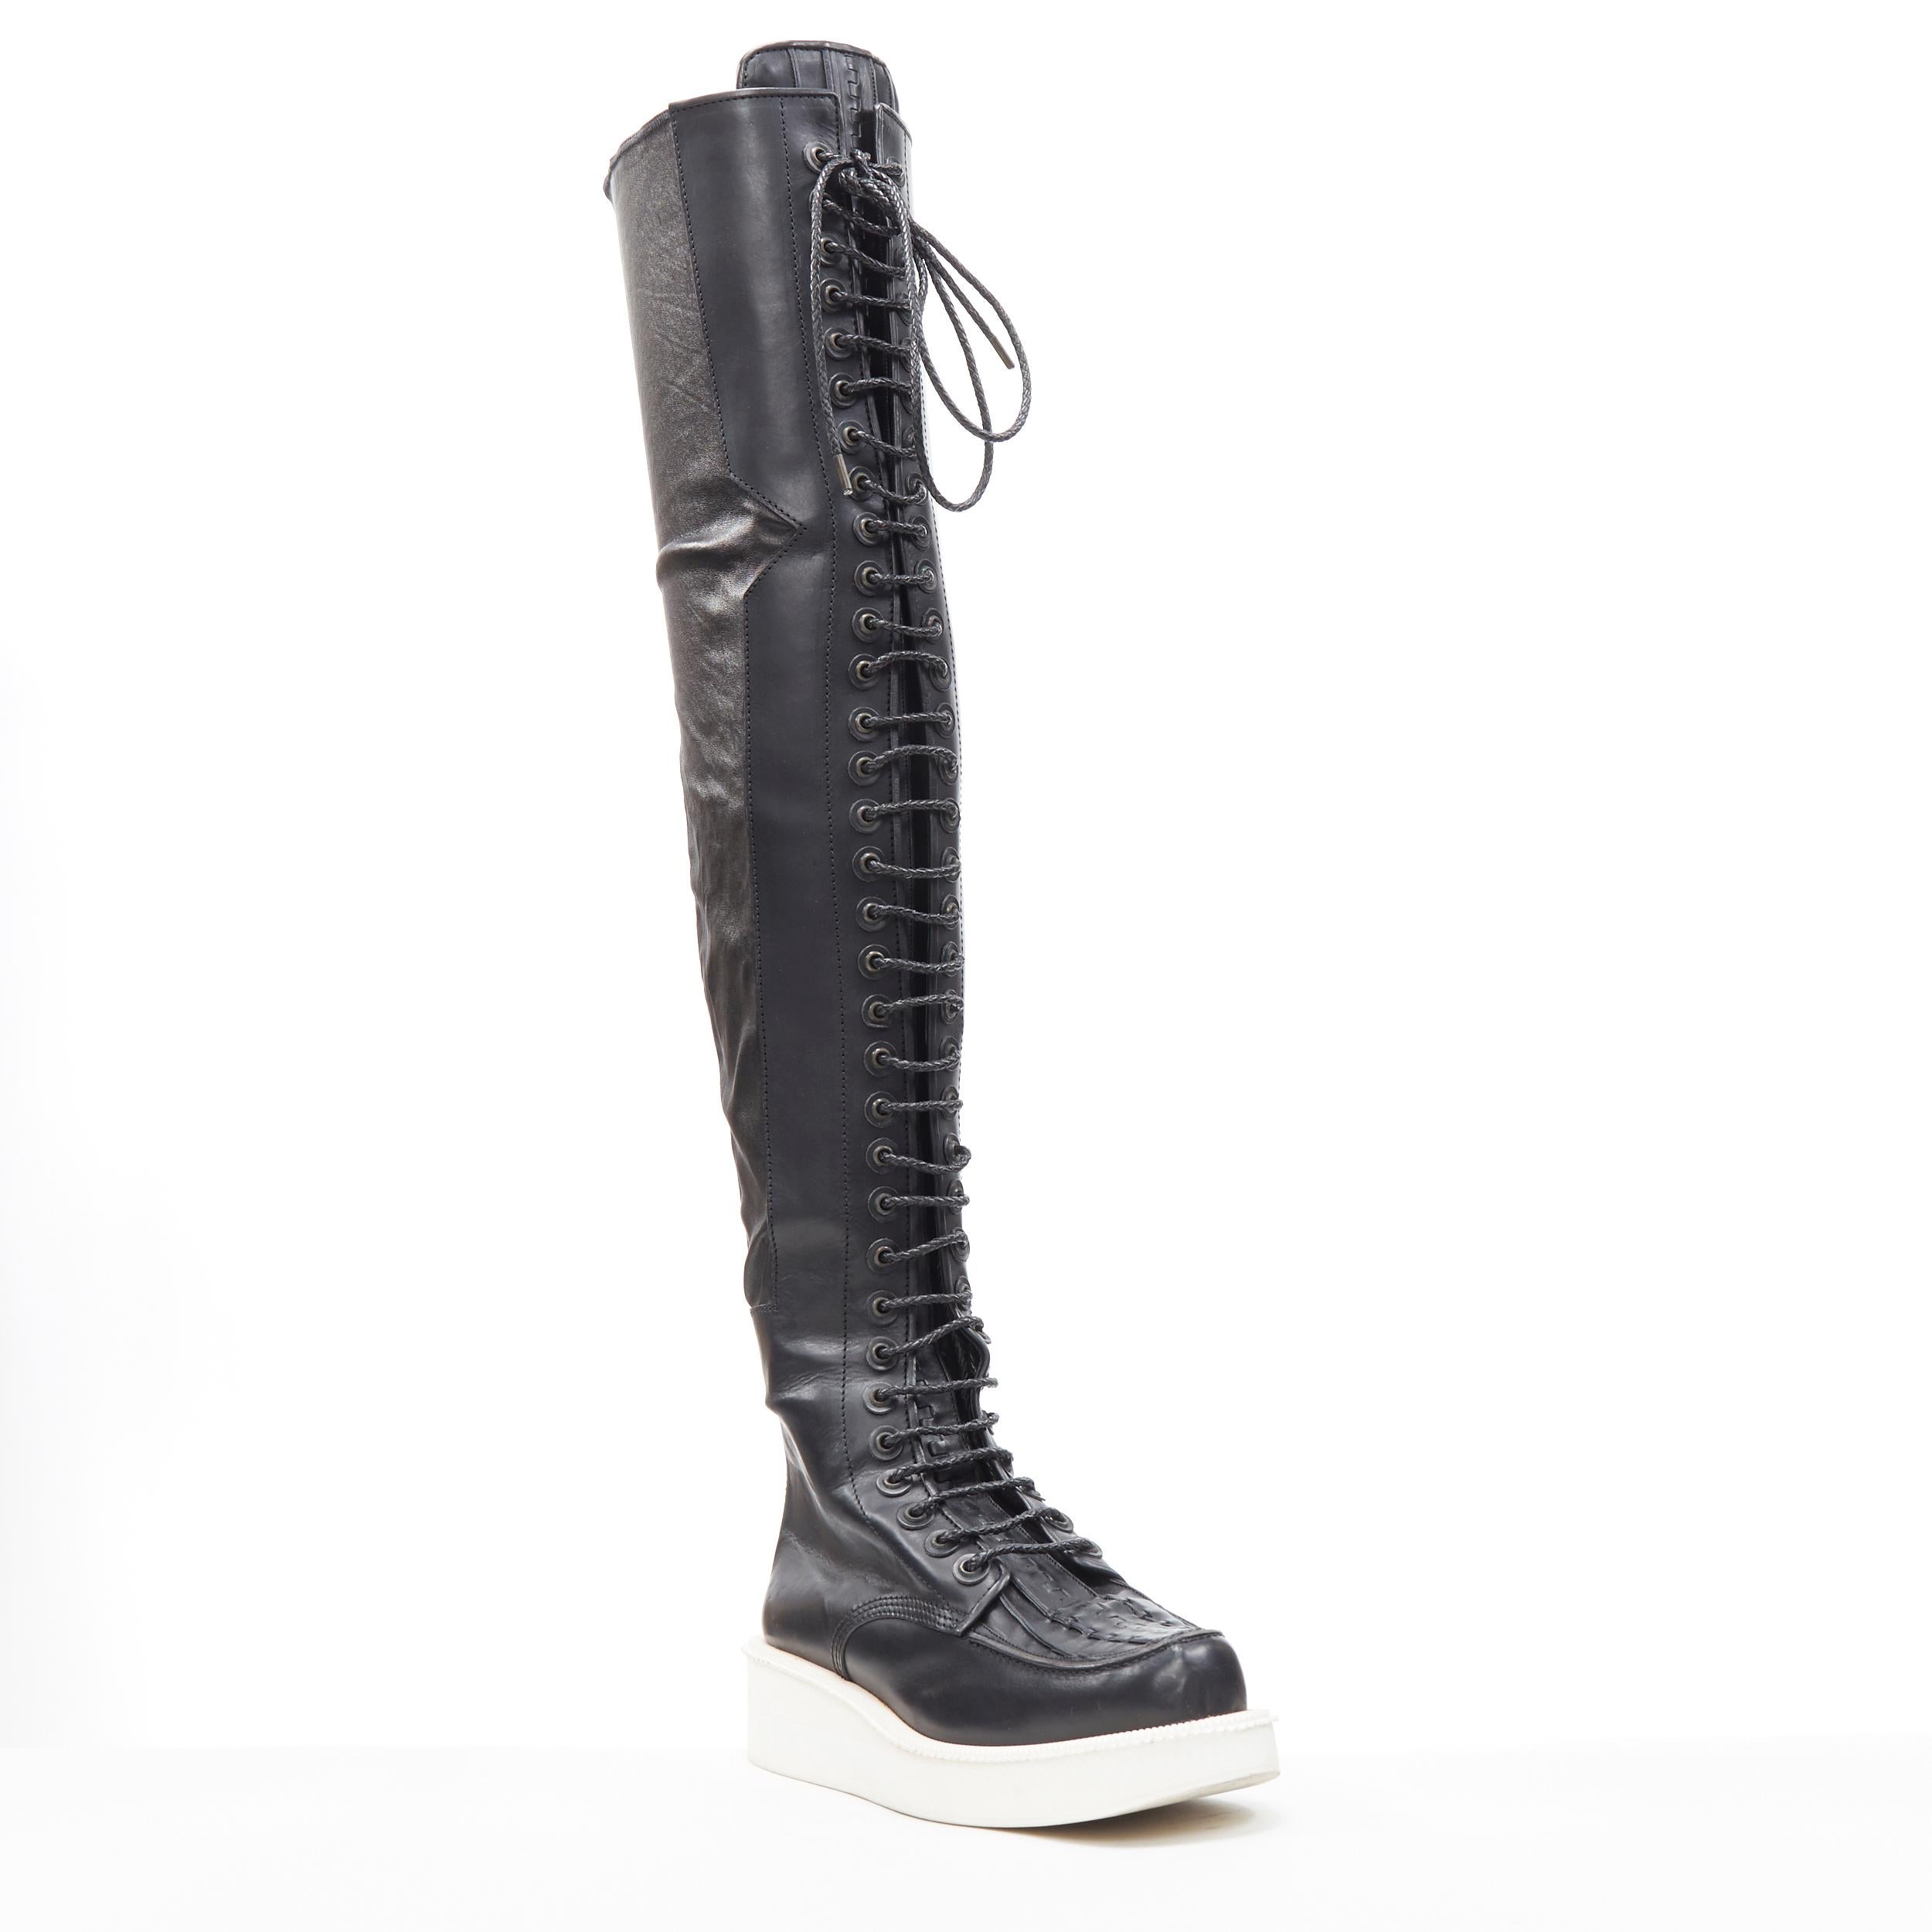 rare GIVENCHY RICCARD TISCI AW11 runway lace up over the knee creeper boots EU42
Brand: Givenchy
Designer: Riccard Tisci
Collection: AW2011
Model Name / Style: Knee high boots
Material: Leather
Color: Black
Pattern: Solid
Closure: Zip
Extra Detail: